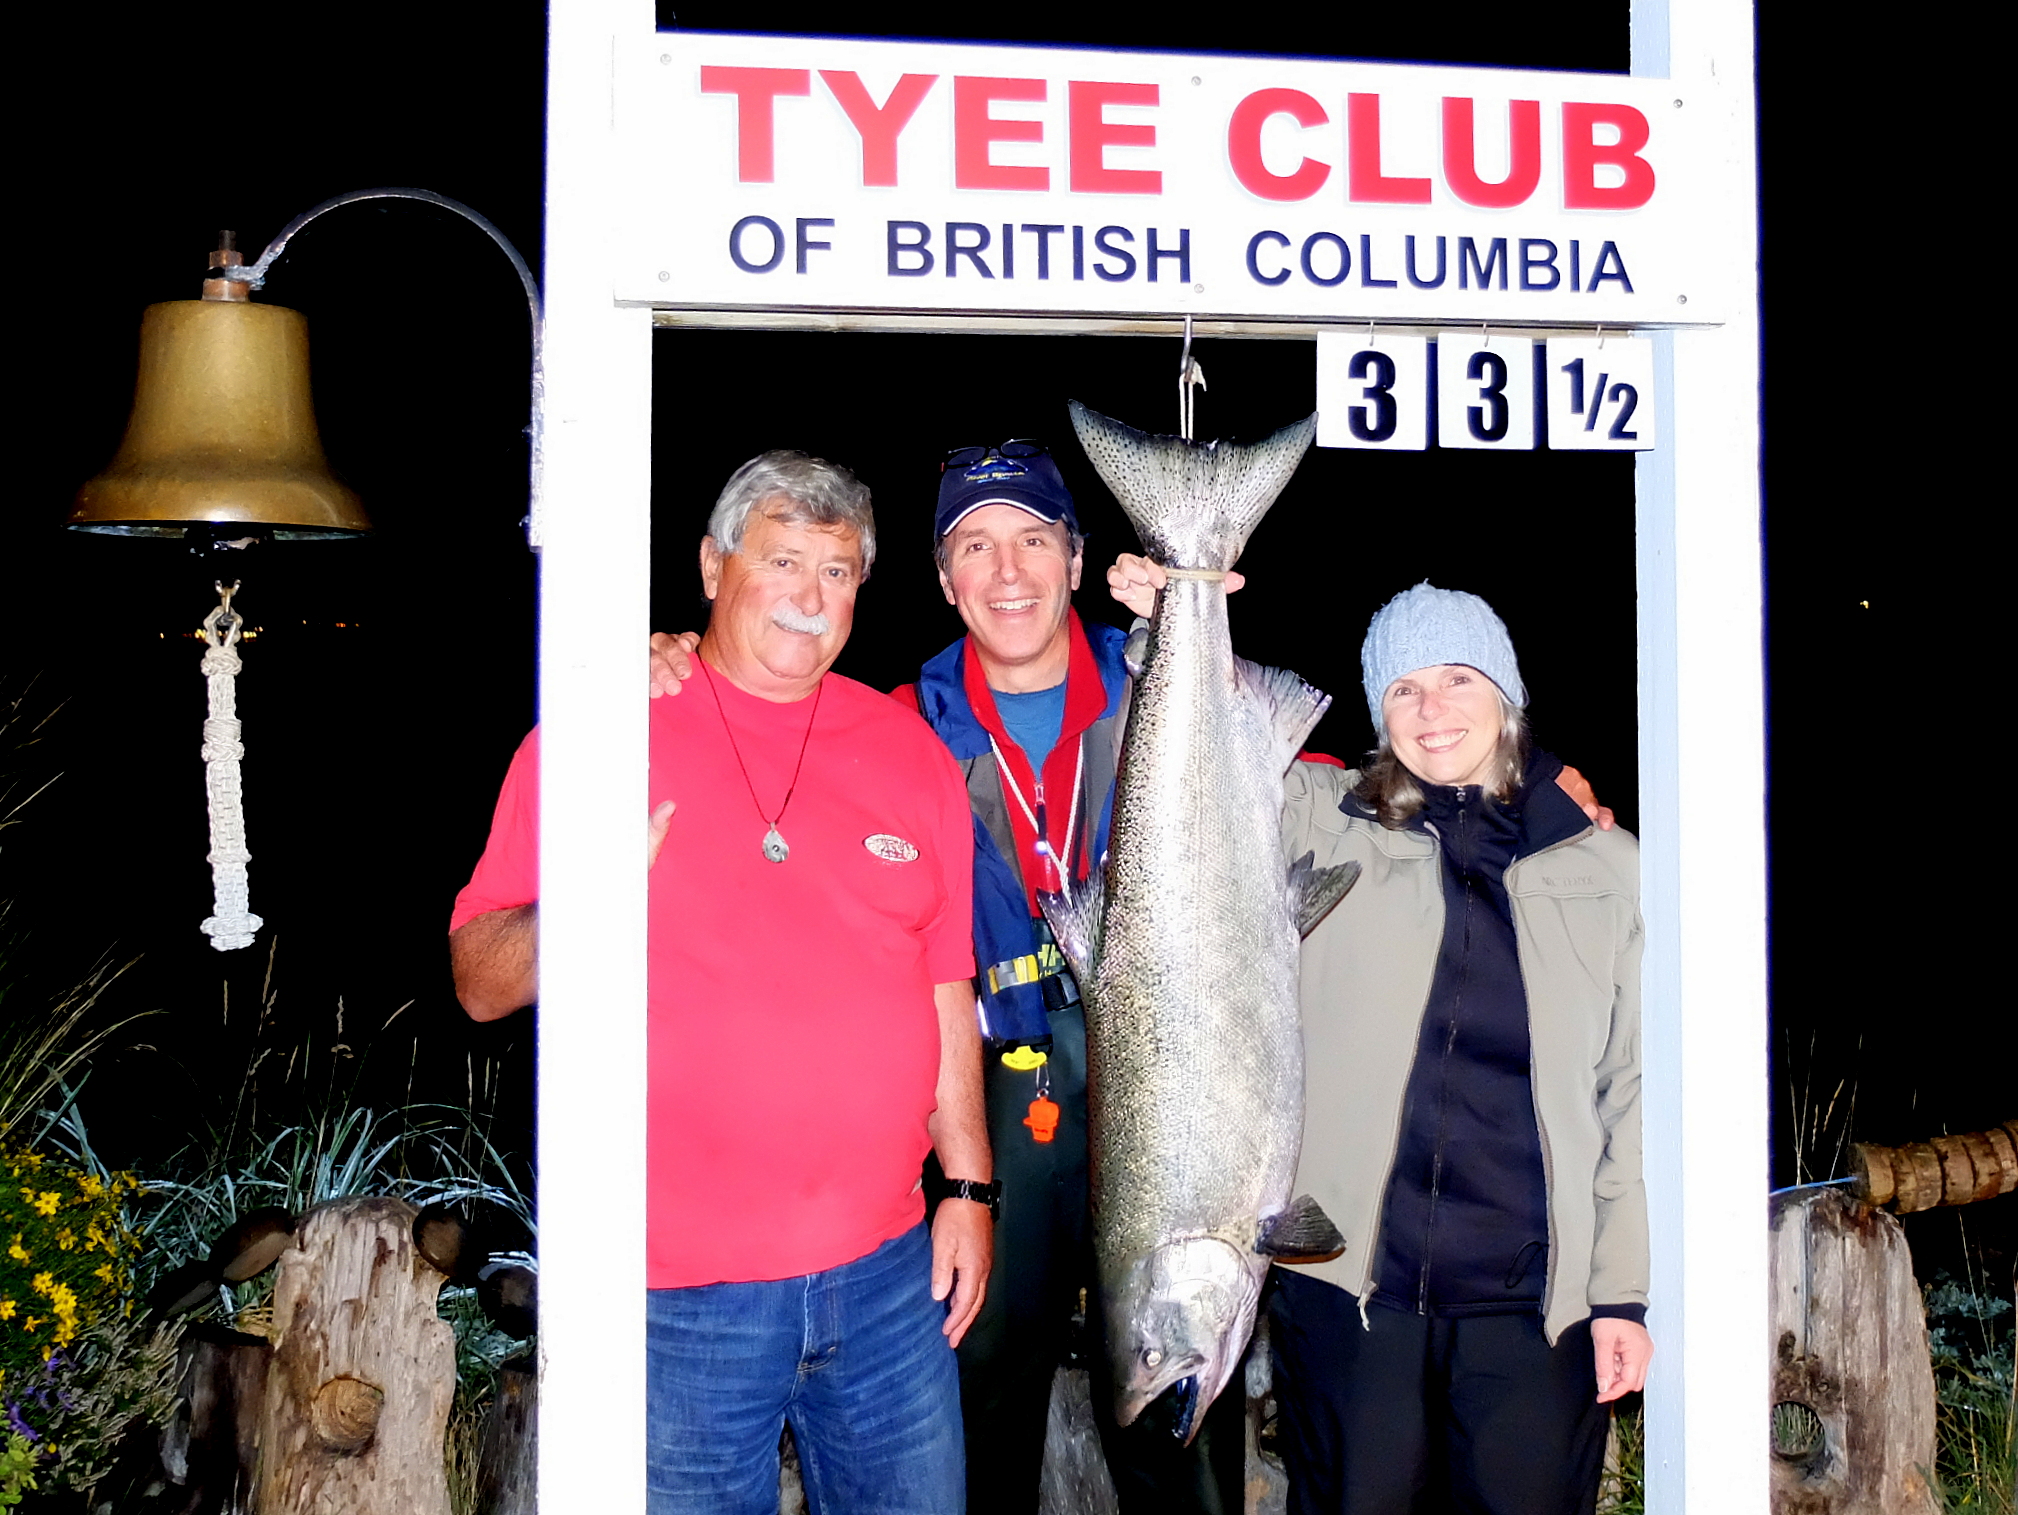 Karen-Hutton-new-member-33.5-lb-Tyee-on-a-plug-rowed-by-Pete-Wipper-Sep-7-2016-@-810-pm.jpg